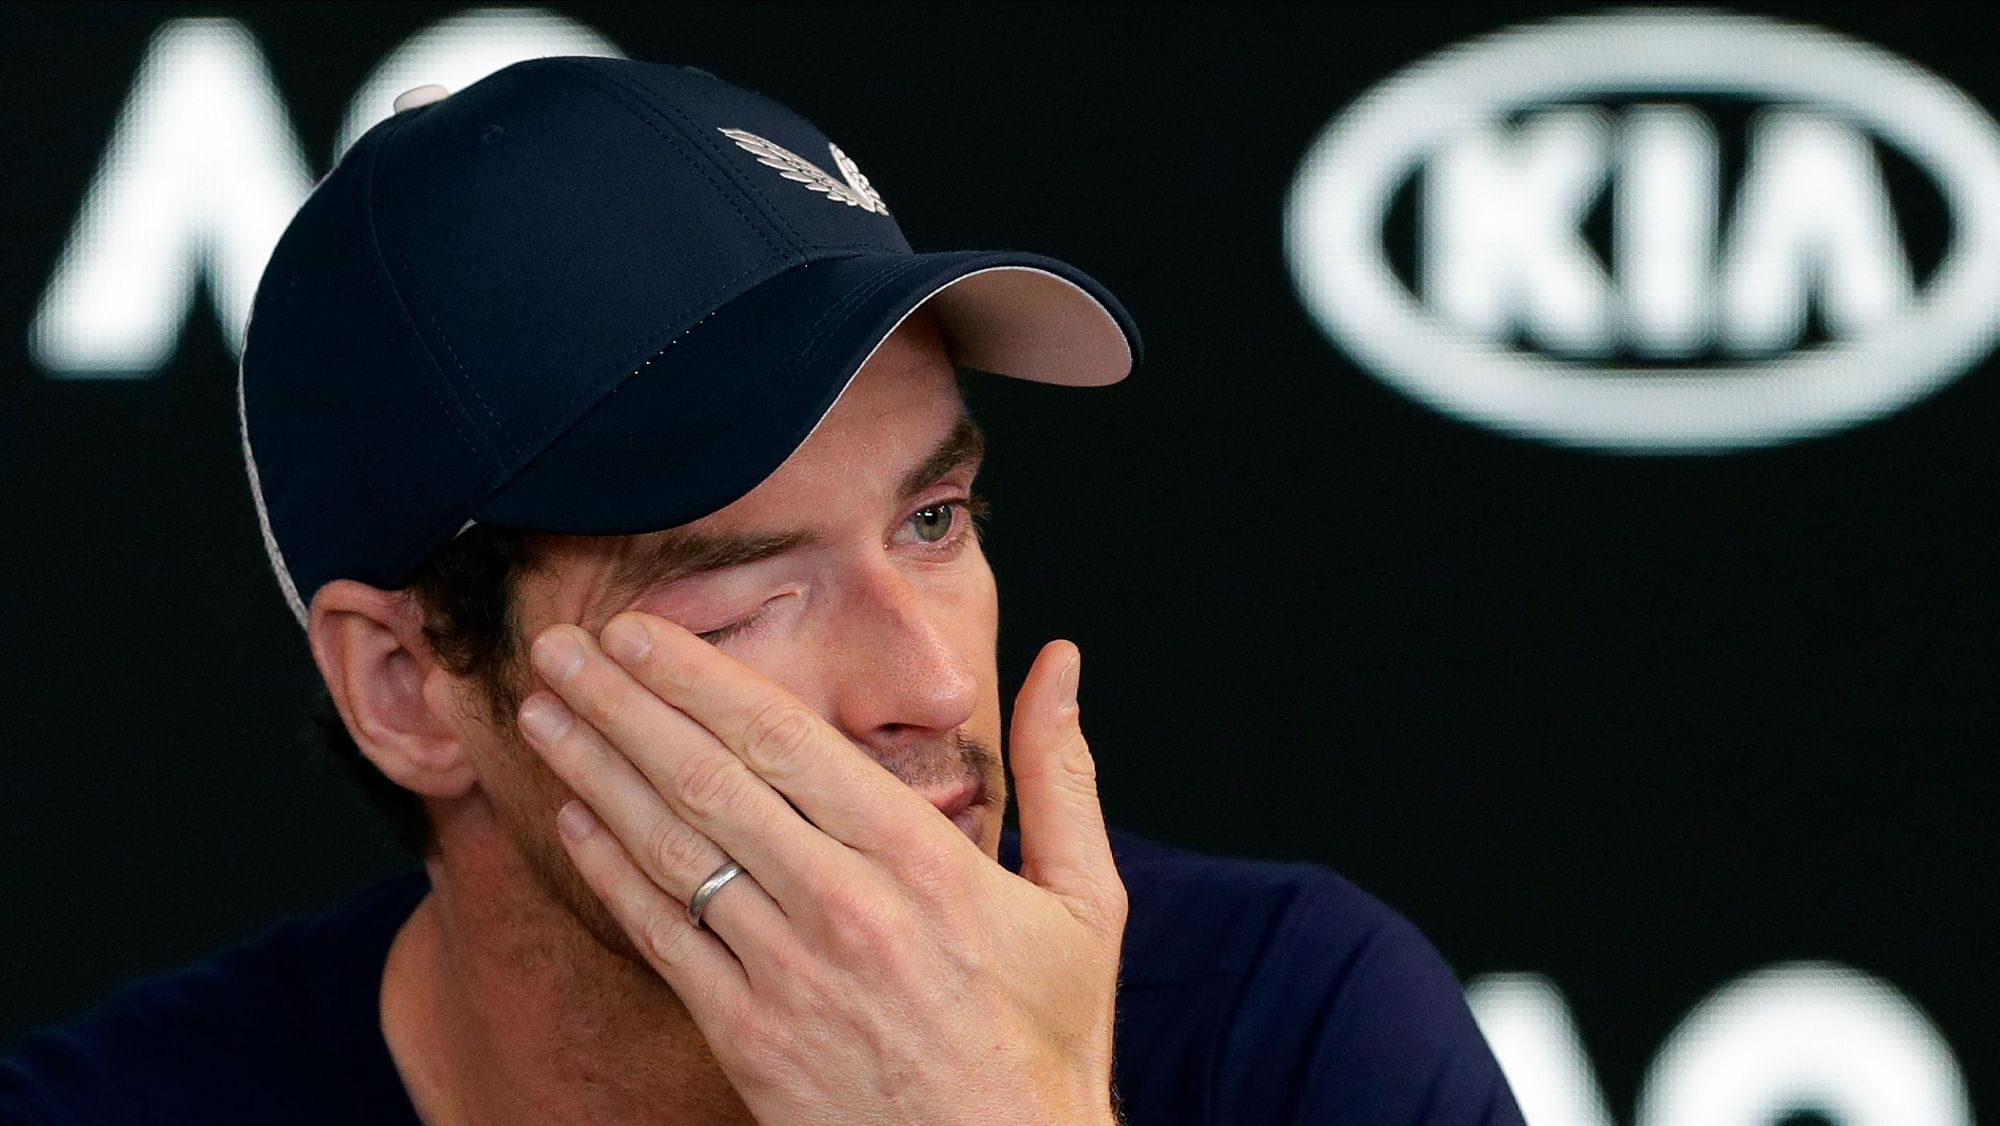 A tearful Andy Murray says the Australian Open could be his last tournament because of a hip injury that has hampered him for almost two years.